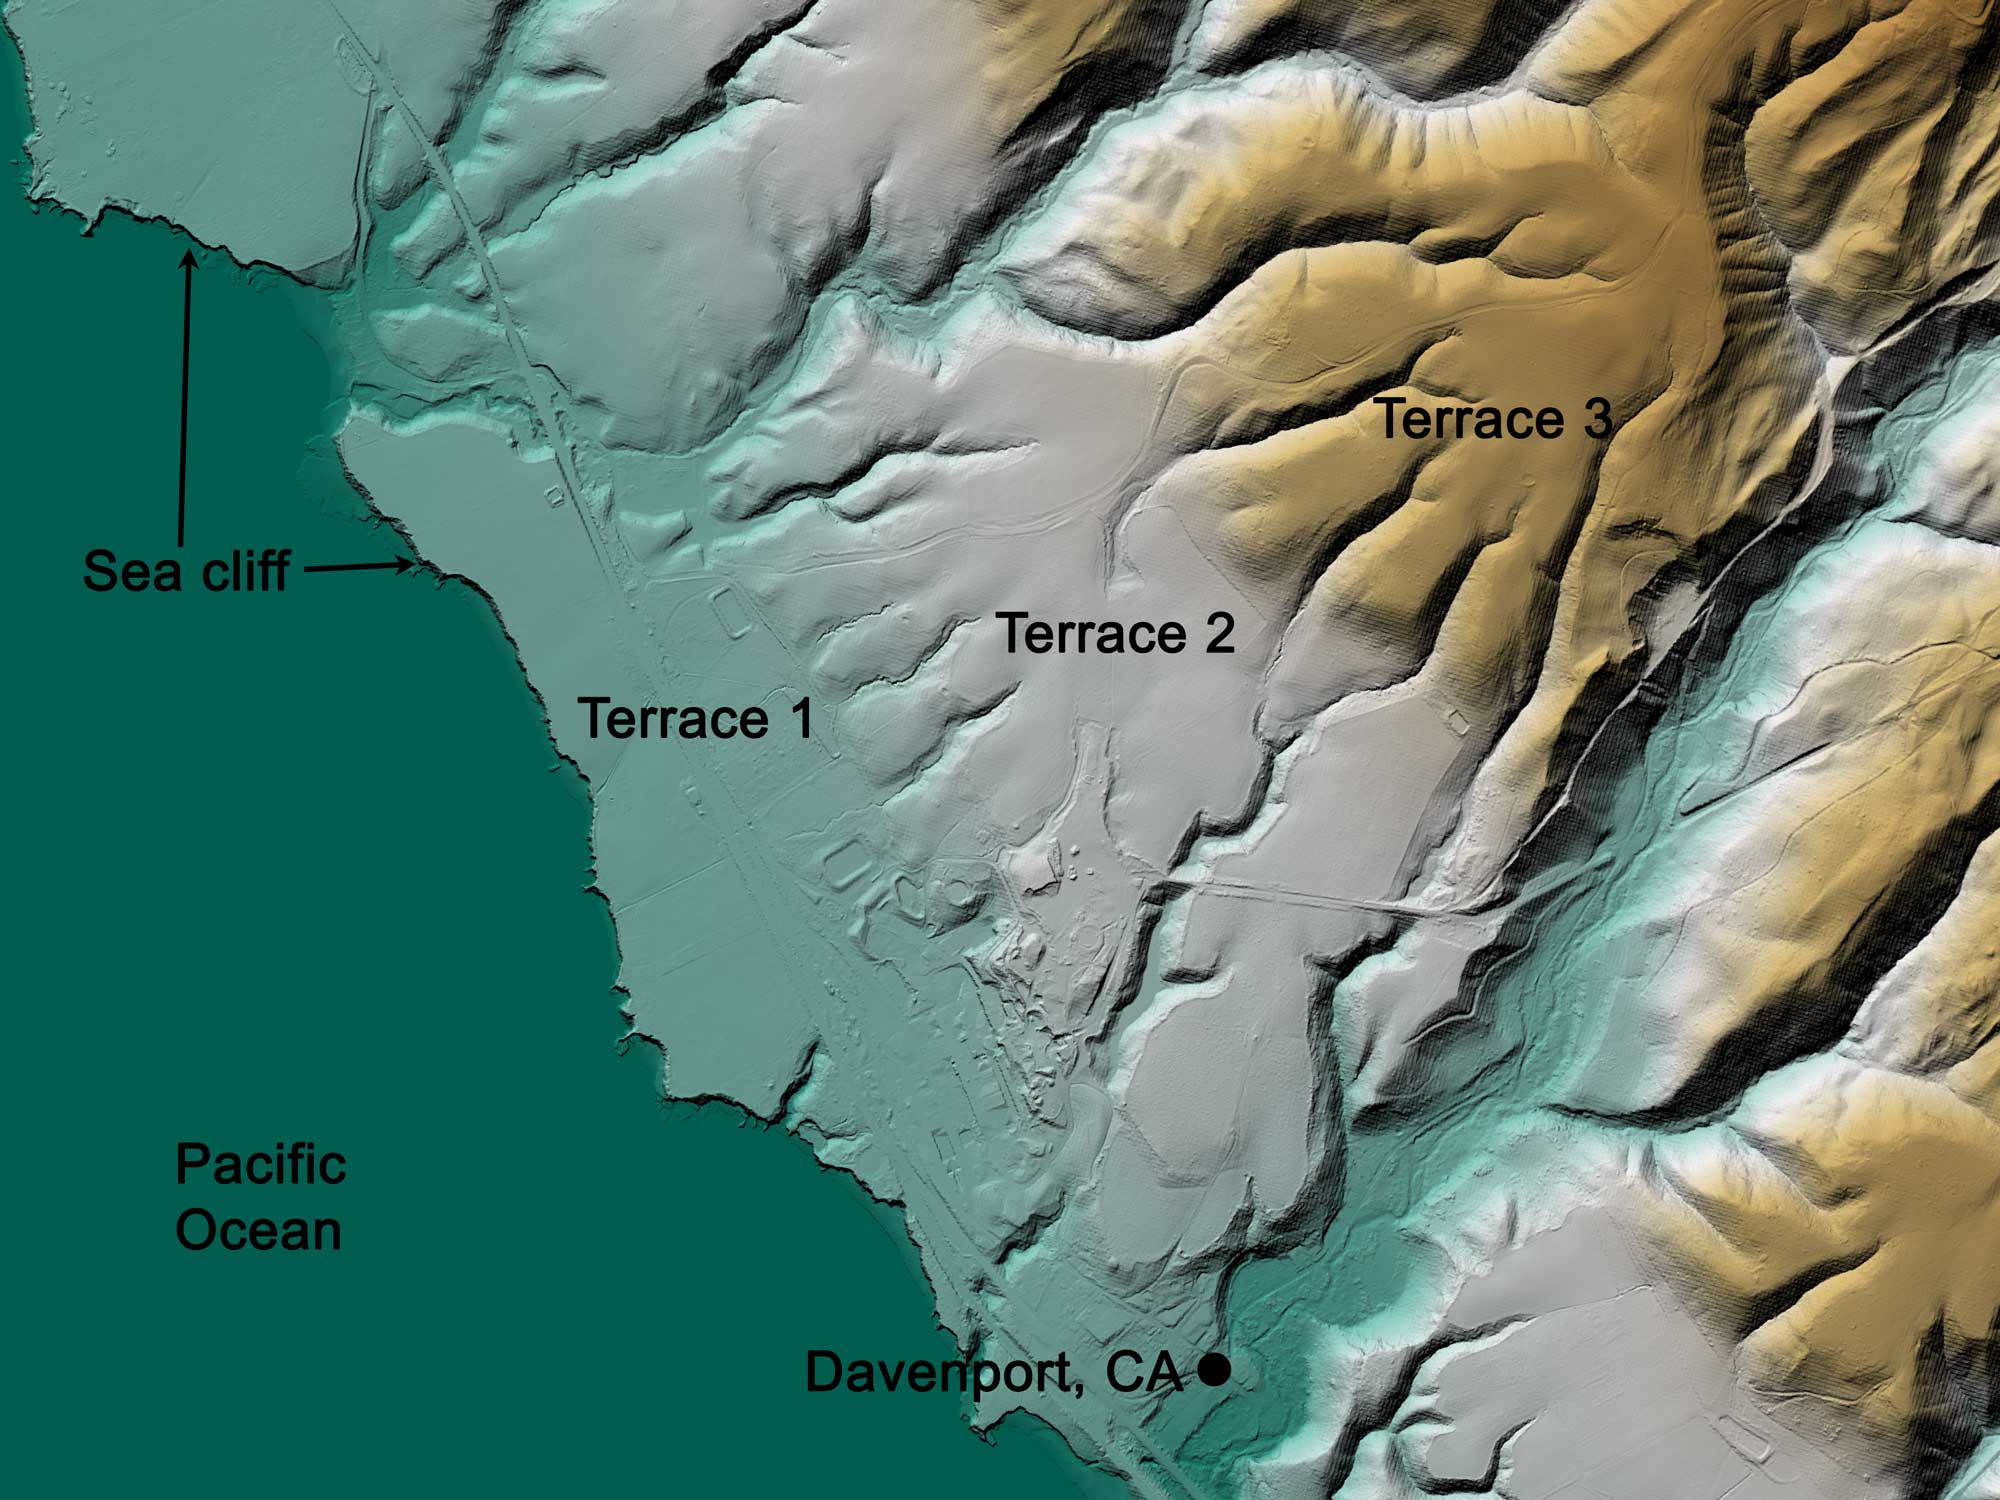 Digital elevation map showing ancient marine terraces preserved in the topography near Davenport, California.